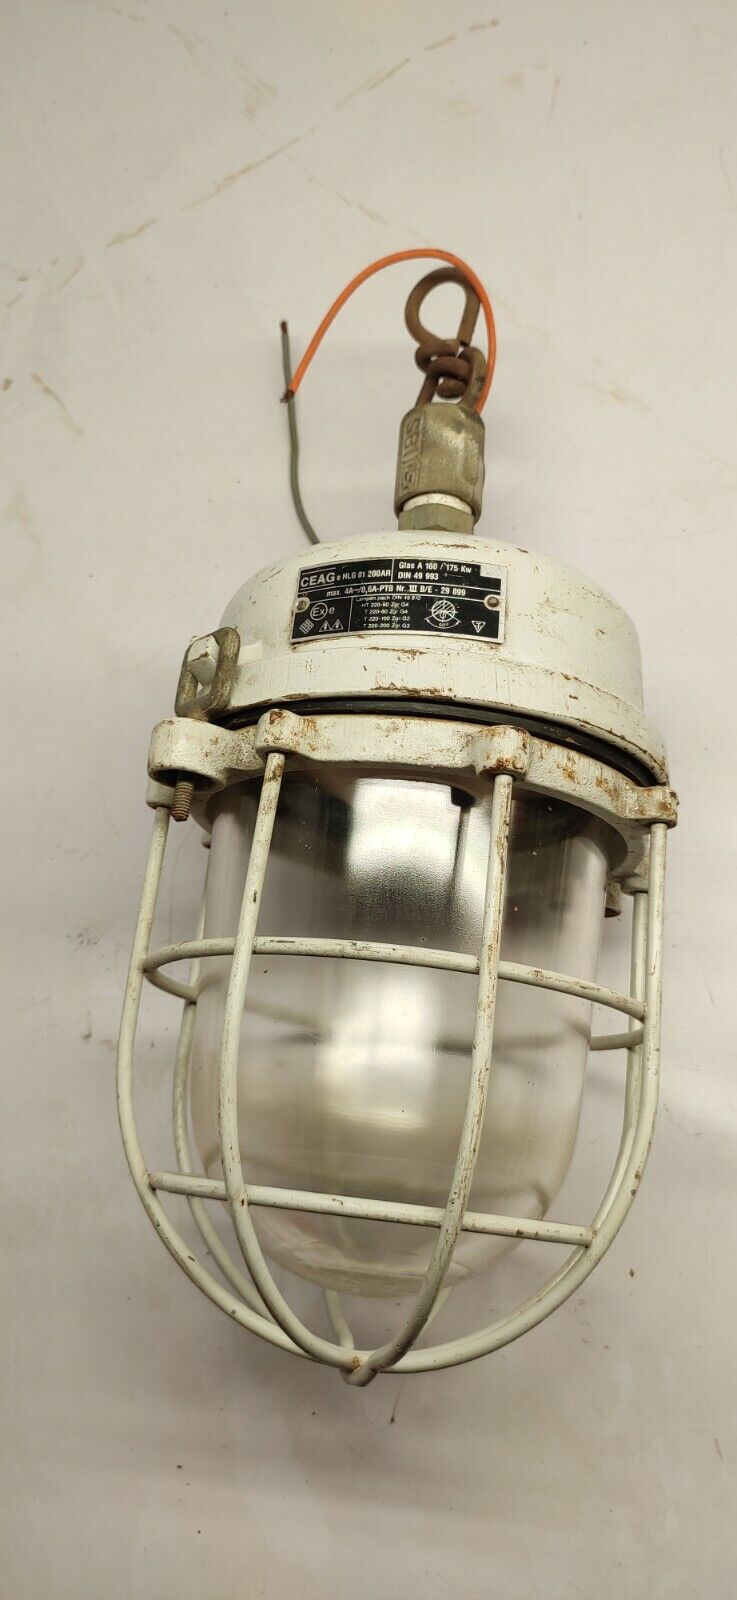 CEAG e HLG 81 200AR online shopping HANGING ANTIQUE HEAVY LIGHT Opening large release sale